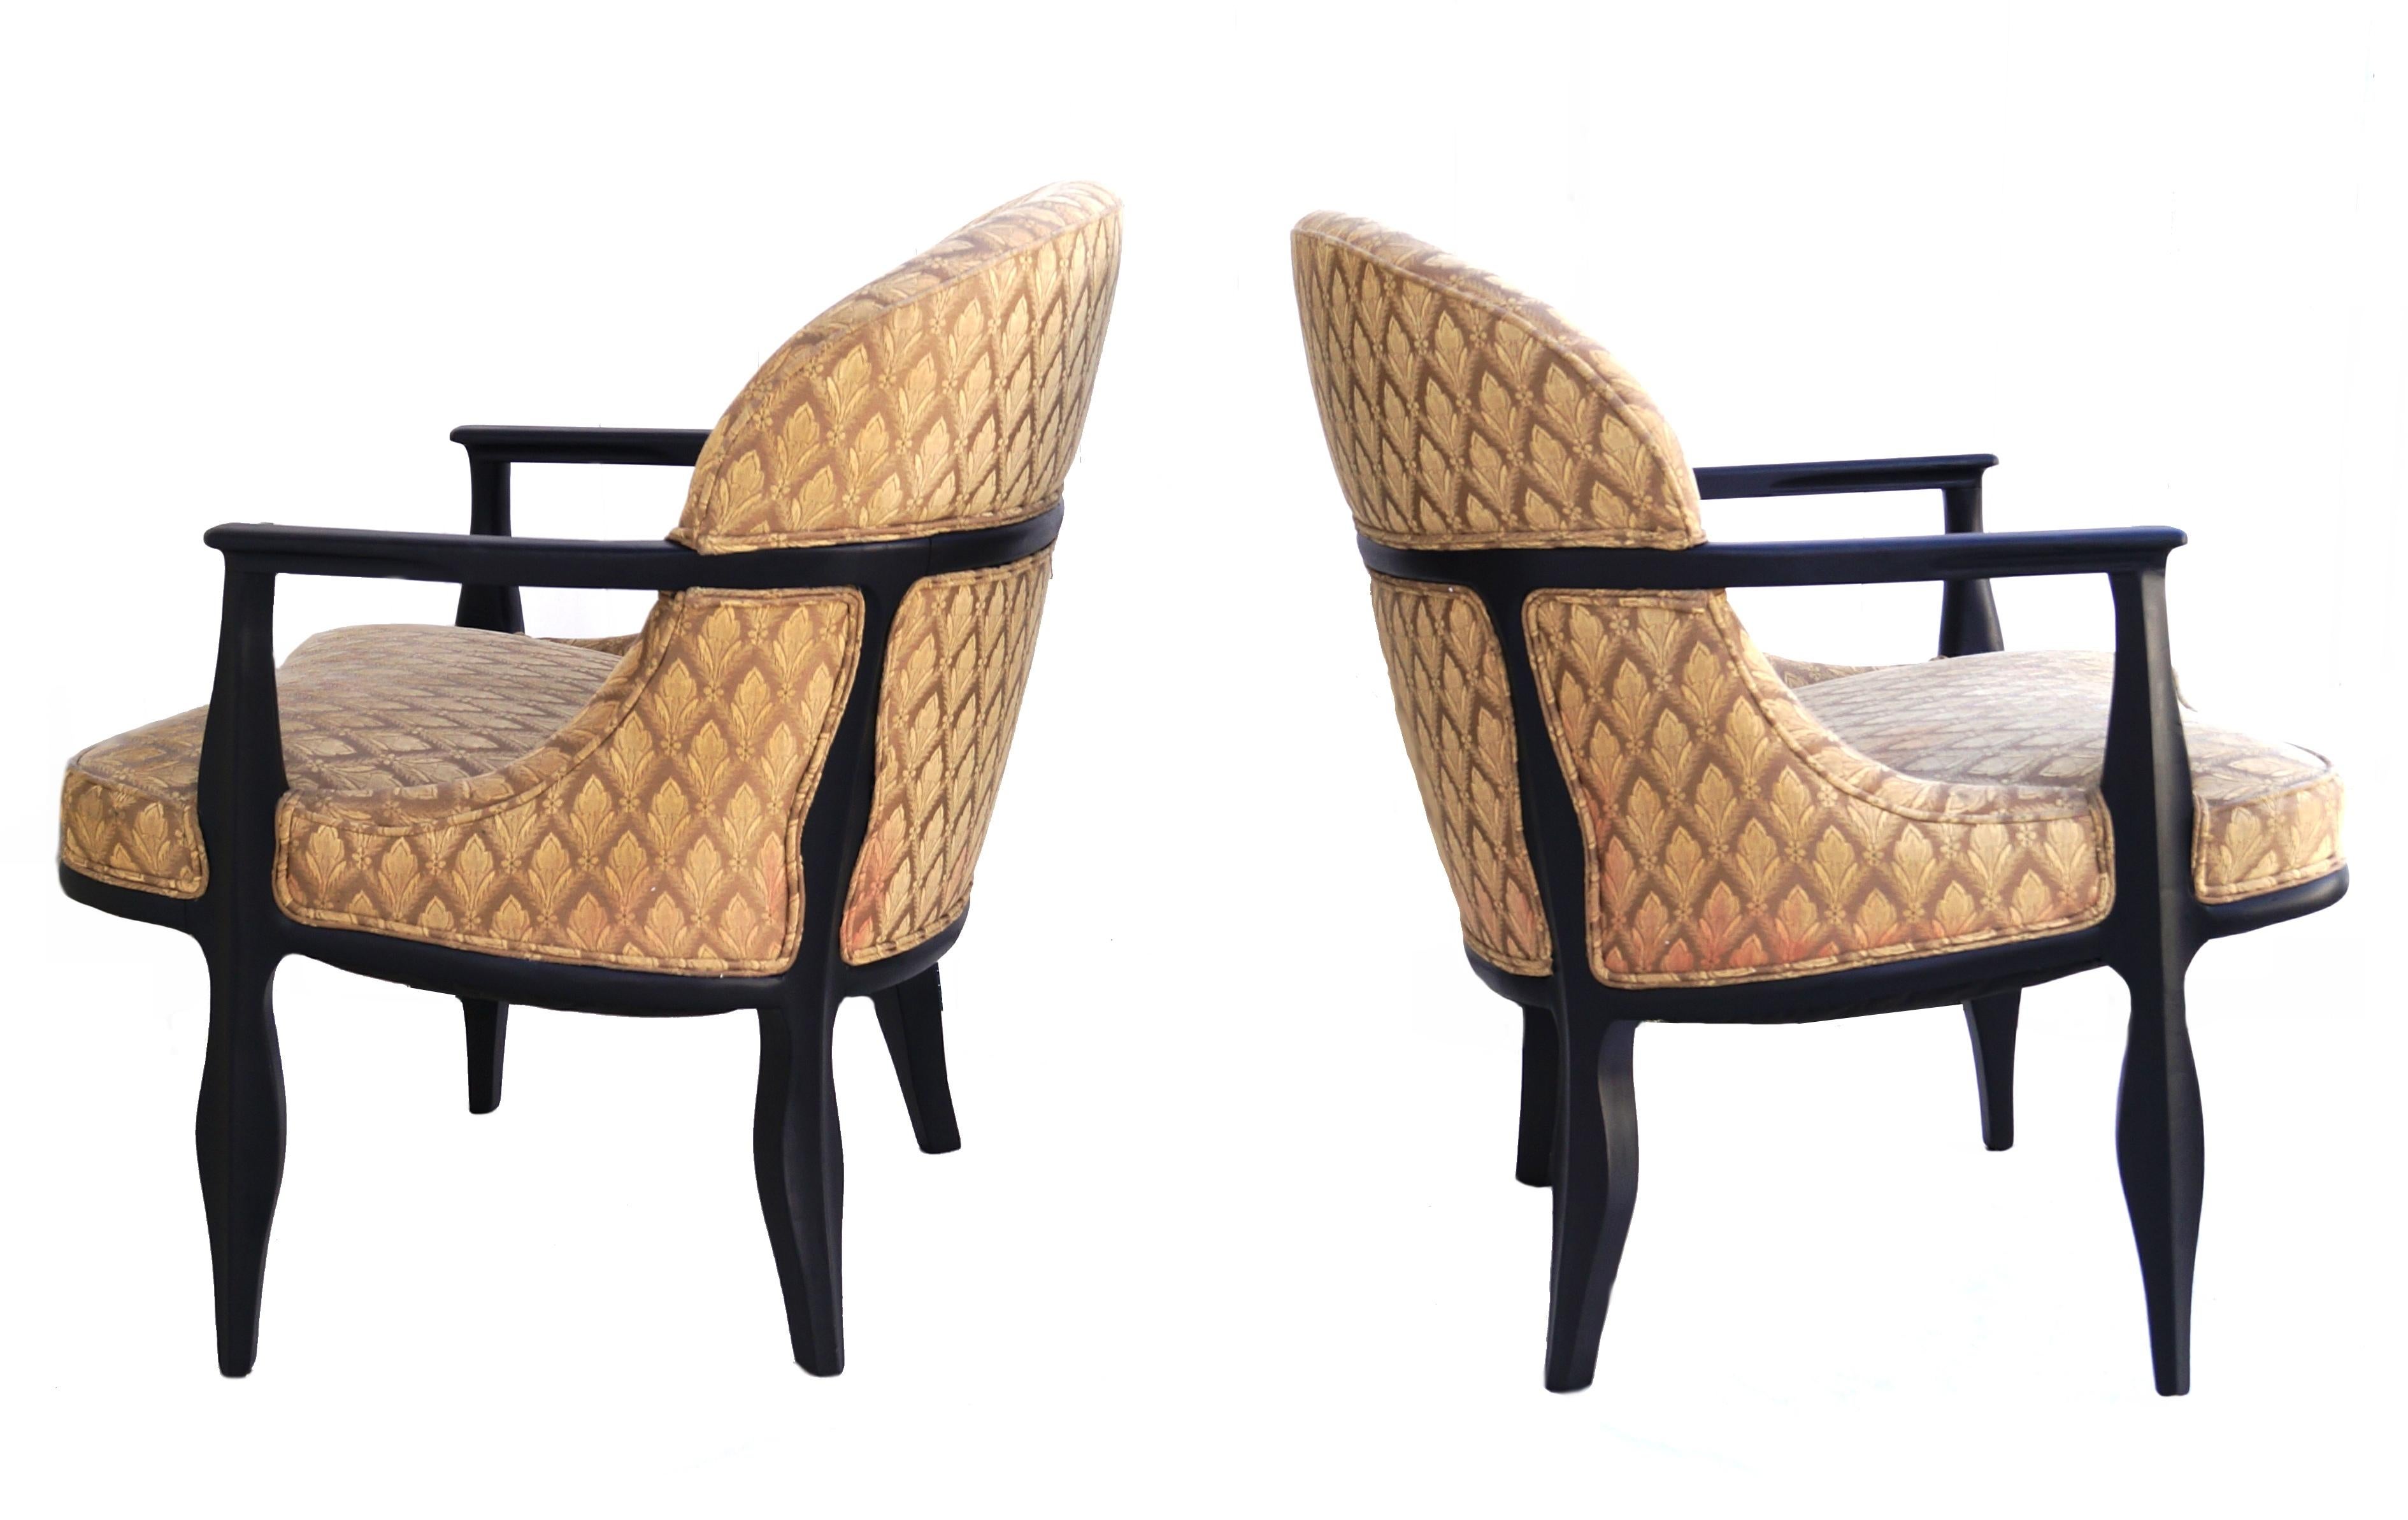 Upholstery Pair of Edward J. Wormley Janus Lounge Chairs for Dunbar For Sale